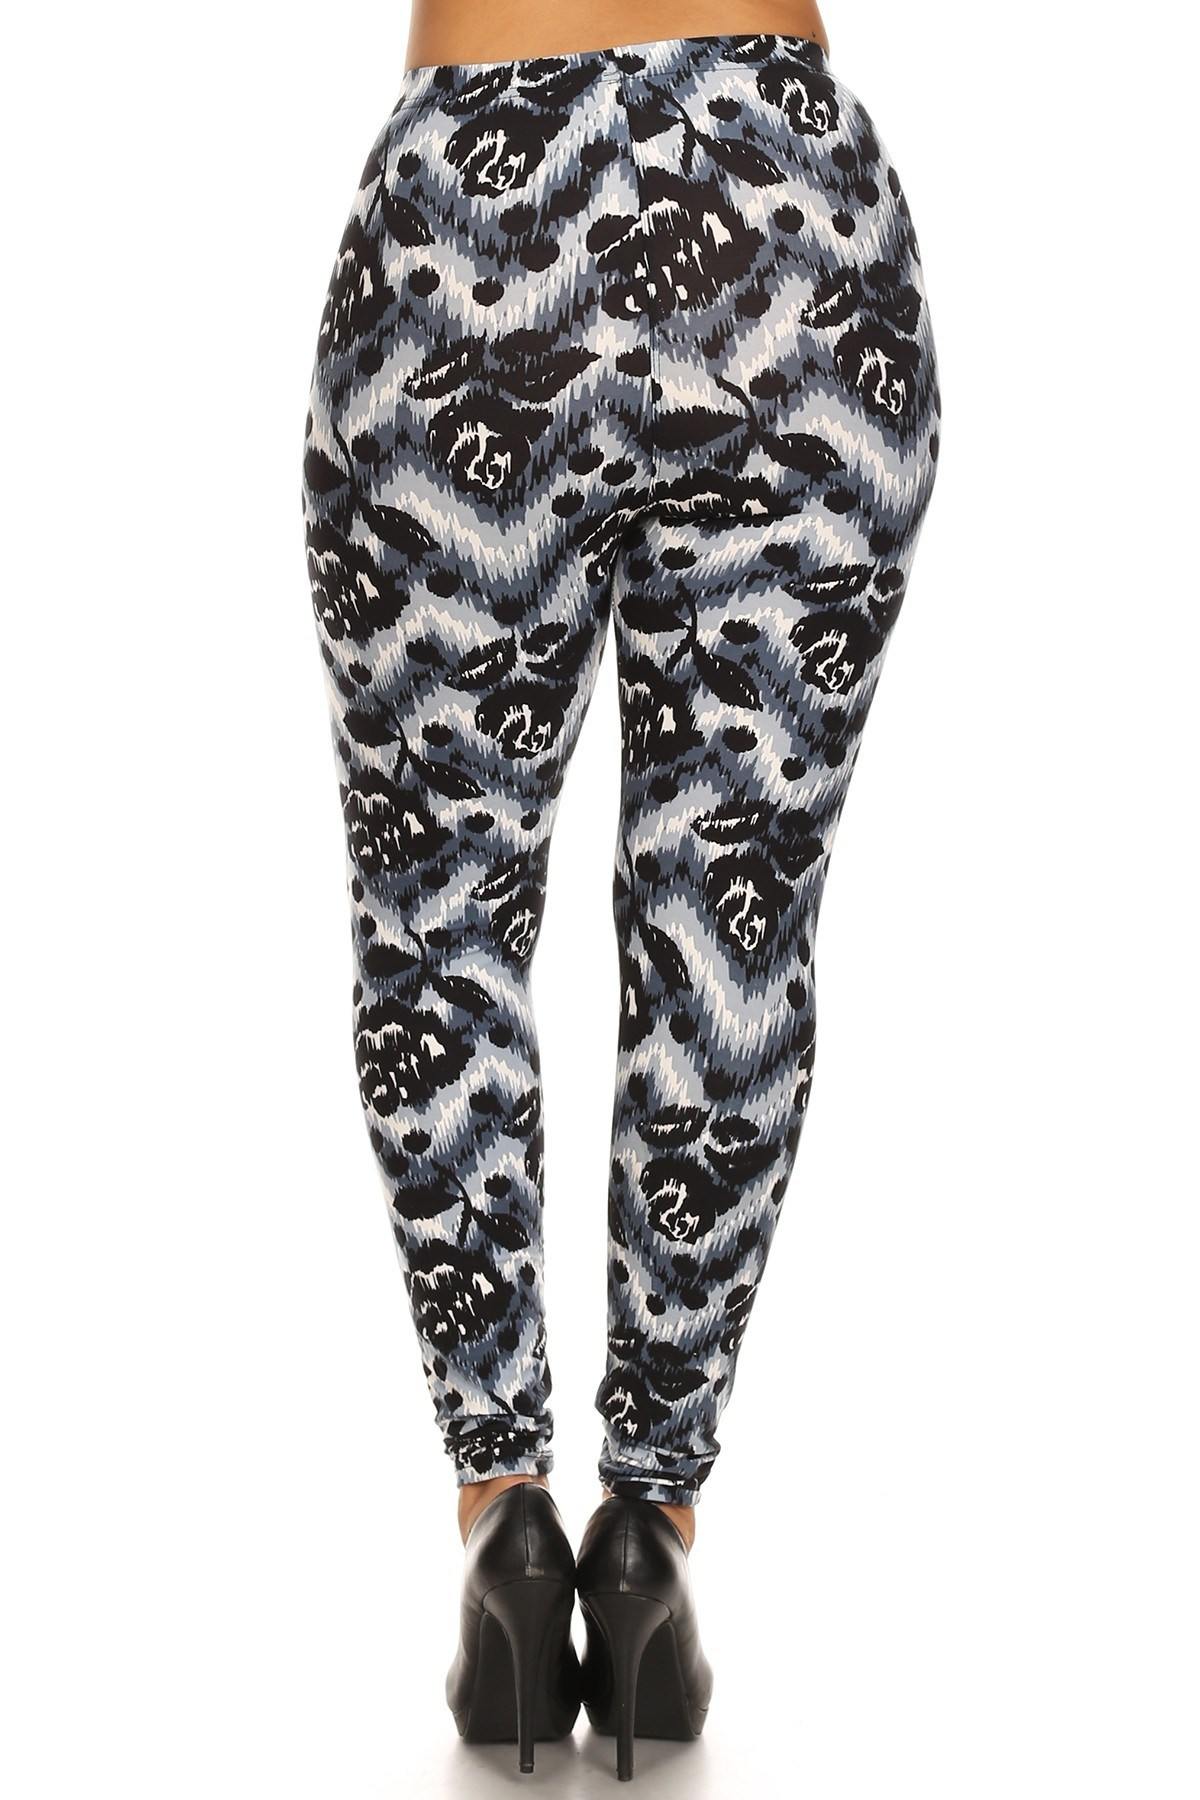 Abstract Print, Full Length Leggings In A Slim Fitting Style With A Banded High Waist - Pearlara